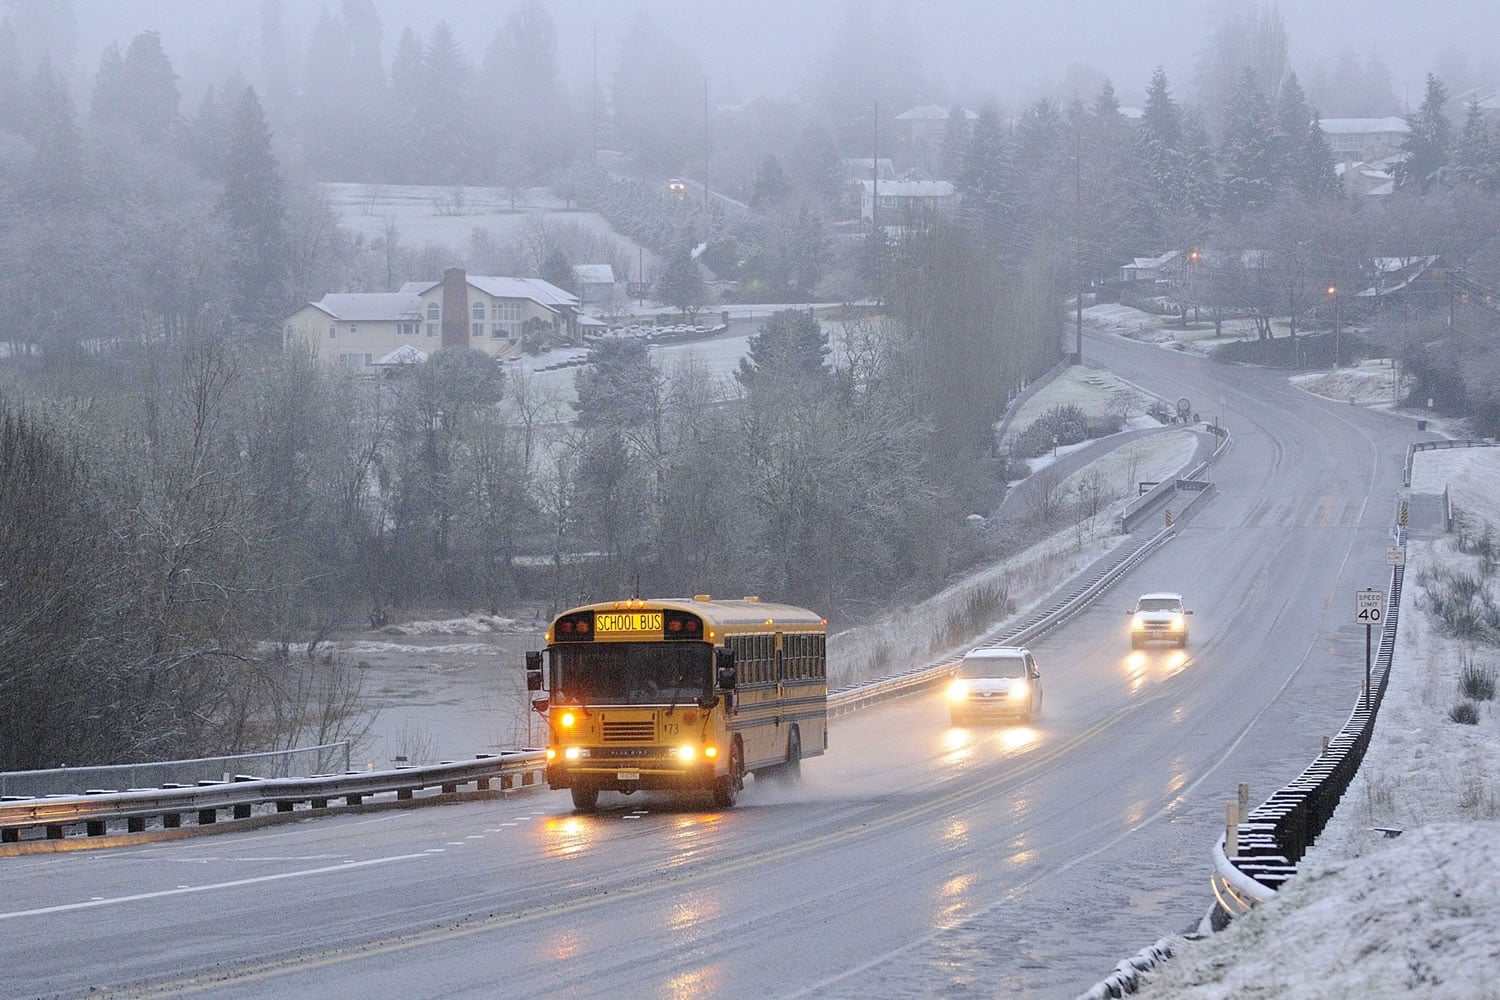 A Vancouver School District School bus makes its way across Salmon Creek along NW 36th Ave. Tuesday March 1, 2011 in Vancouver, Washington.